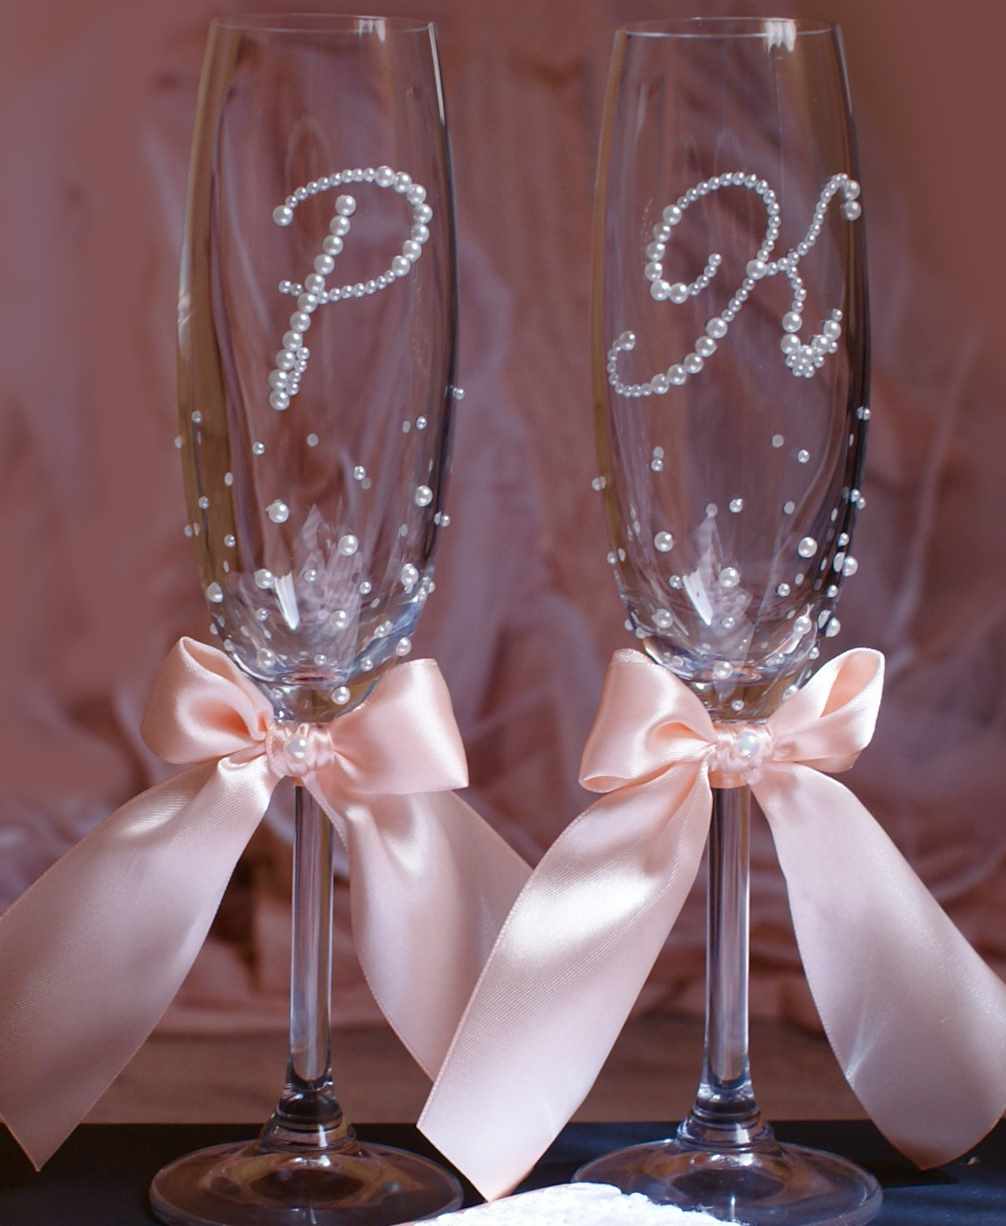 variant of unusual decoration of the style of wedding glasses